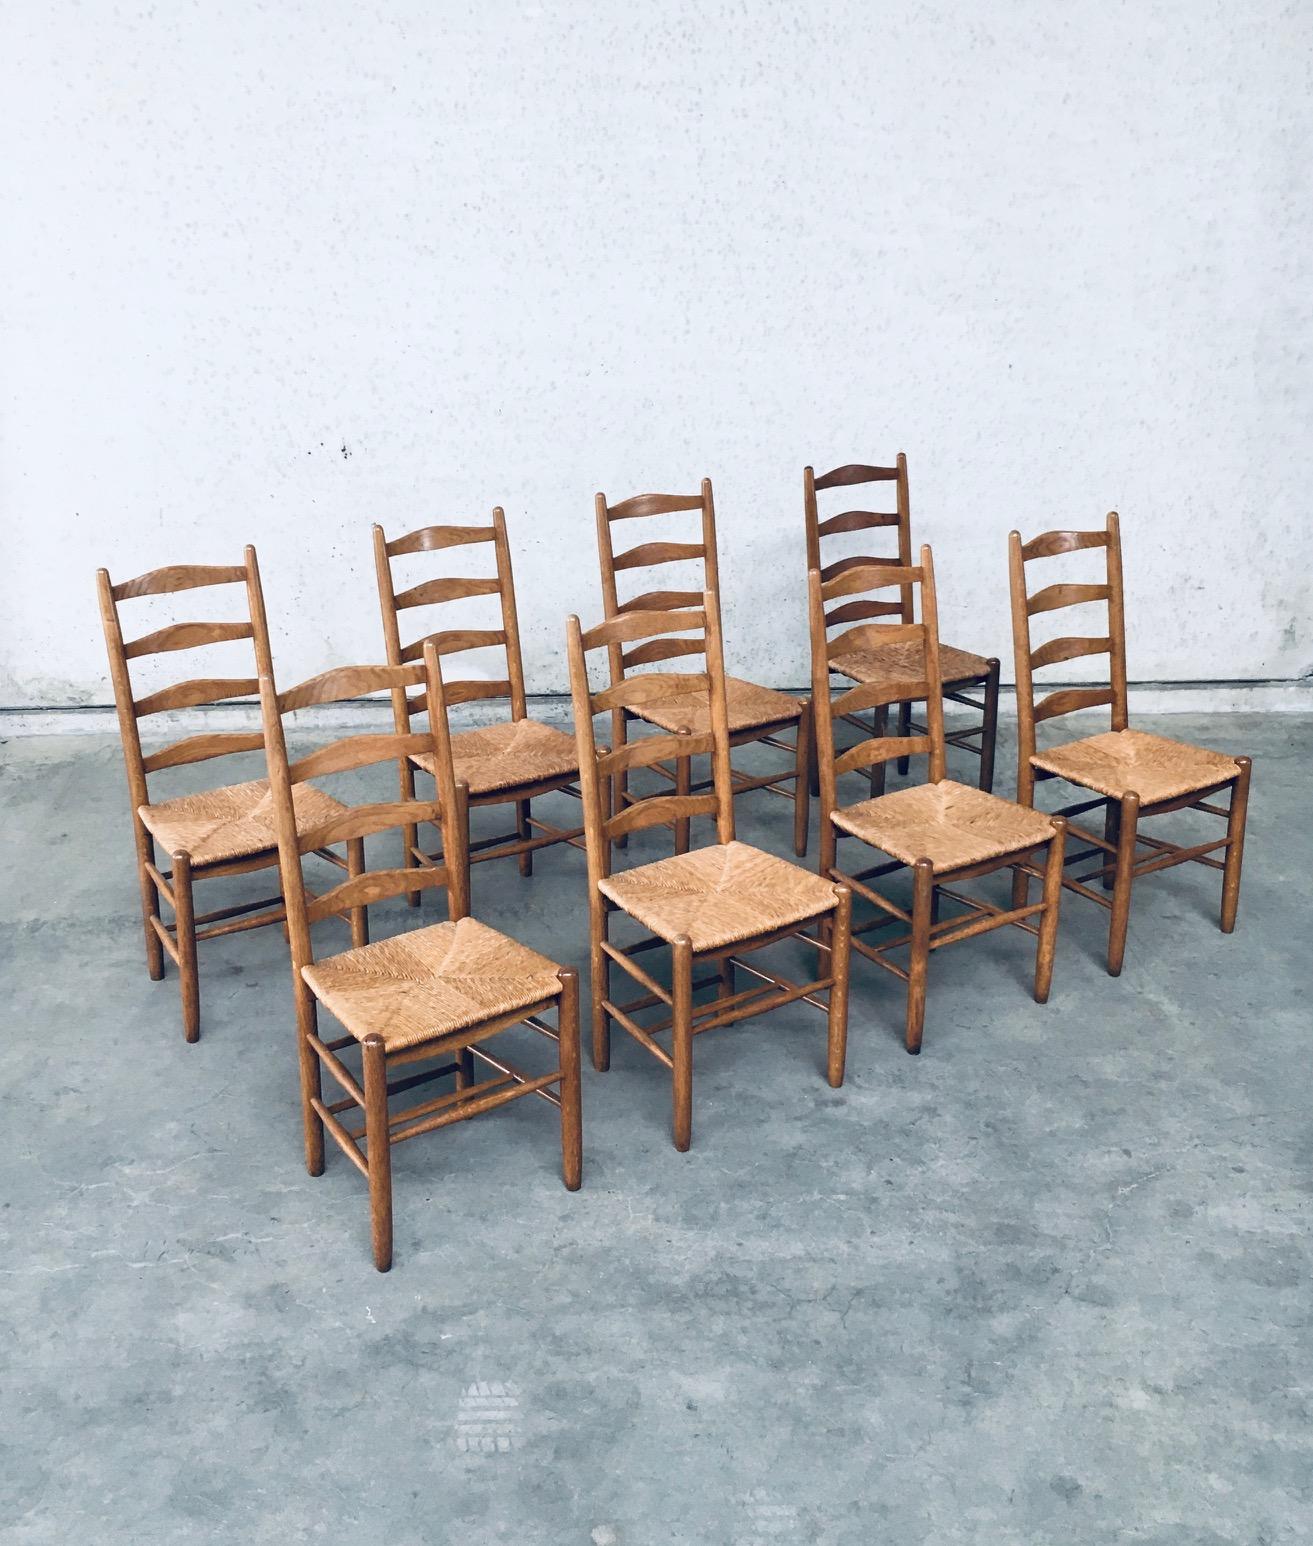 Vintage Rustic Handcrafted Oak & Rush Ladder Back Dining Chair set of 8. Made in Belgium, late 1940's, early 1950's. Solid oak constructed chair with woven rush seat. Ladder back model with several spindles in the bottom base for strenght. All